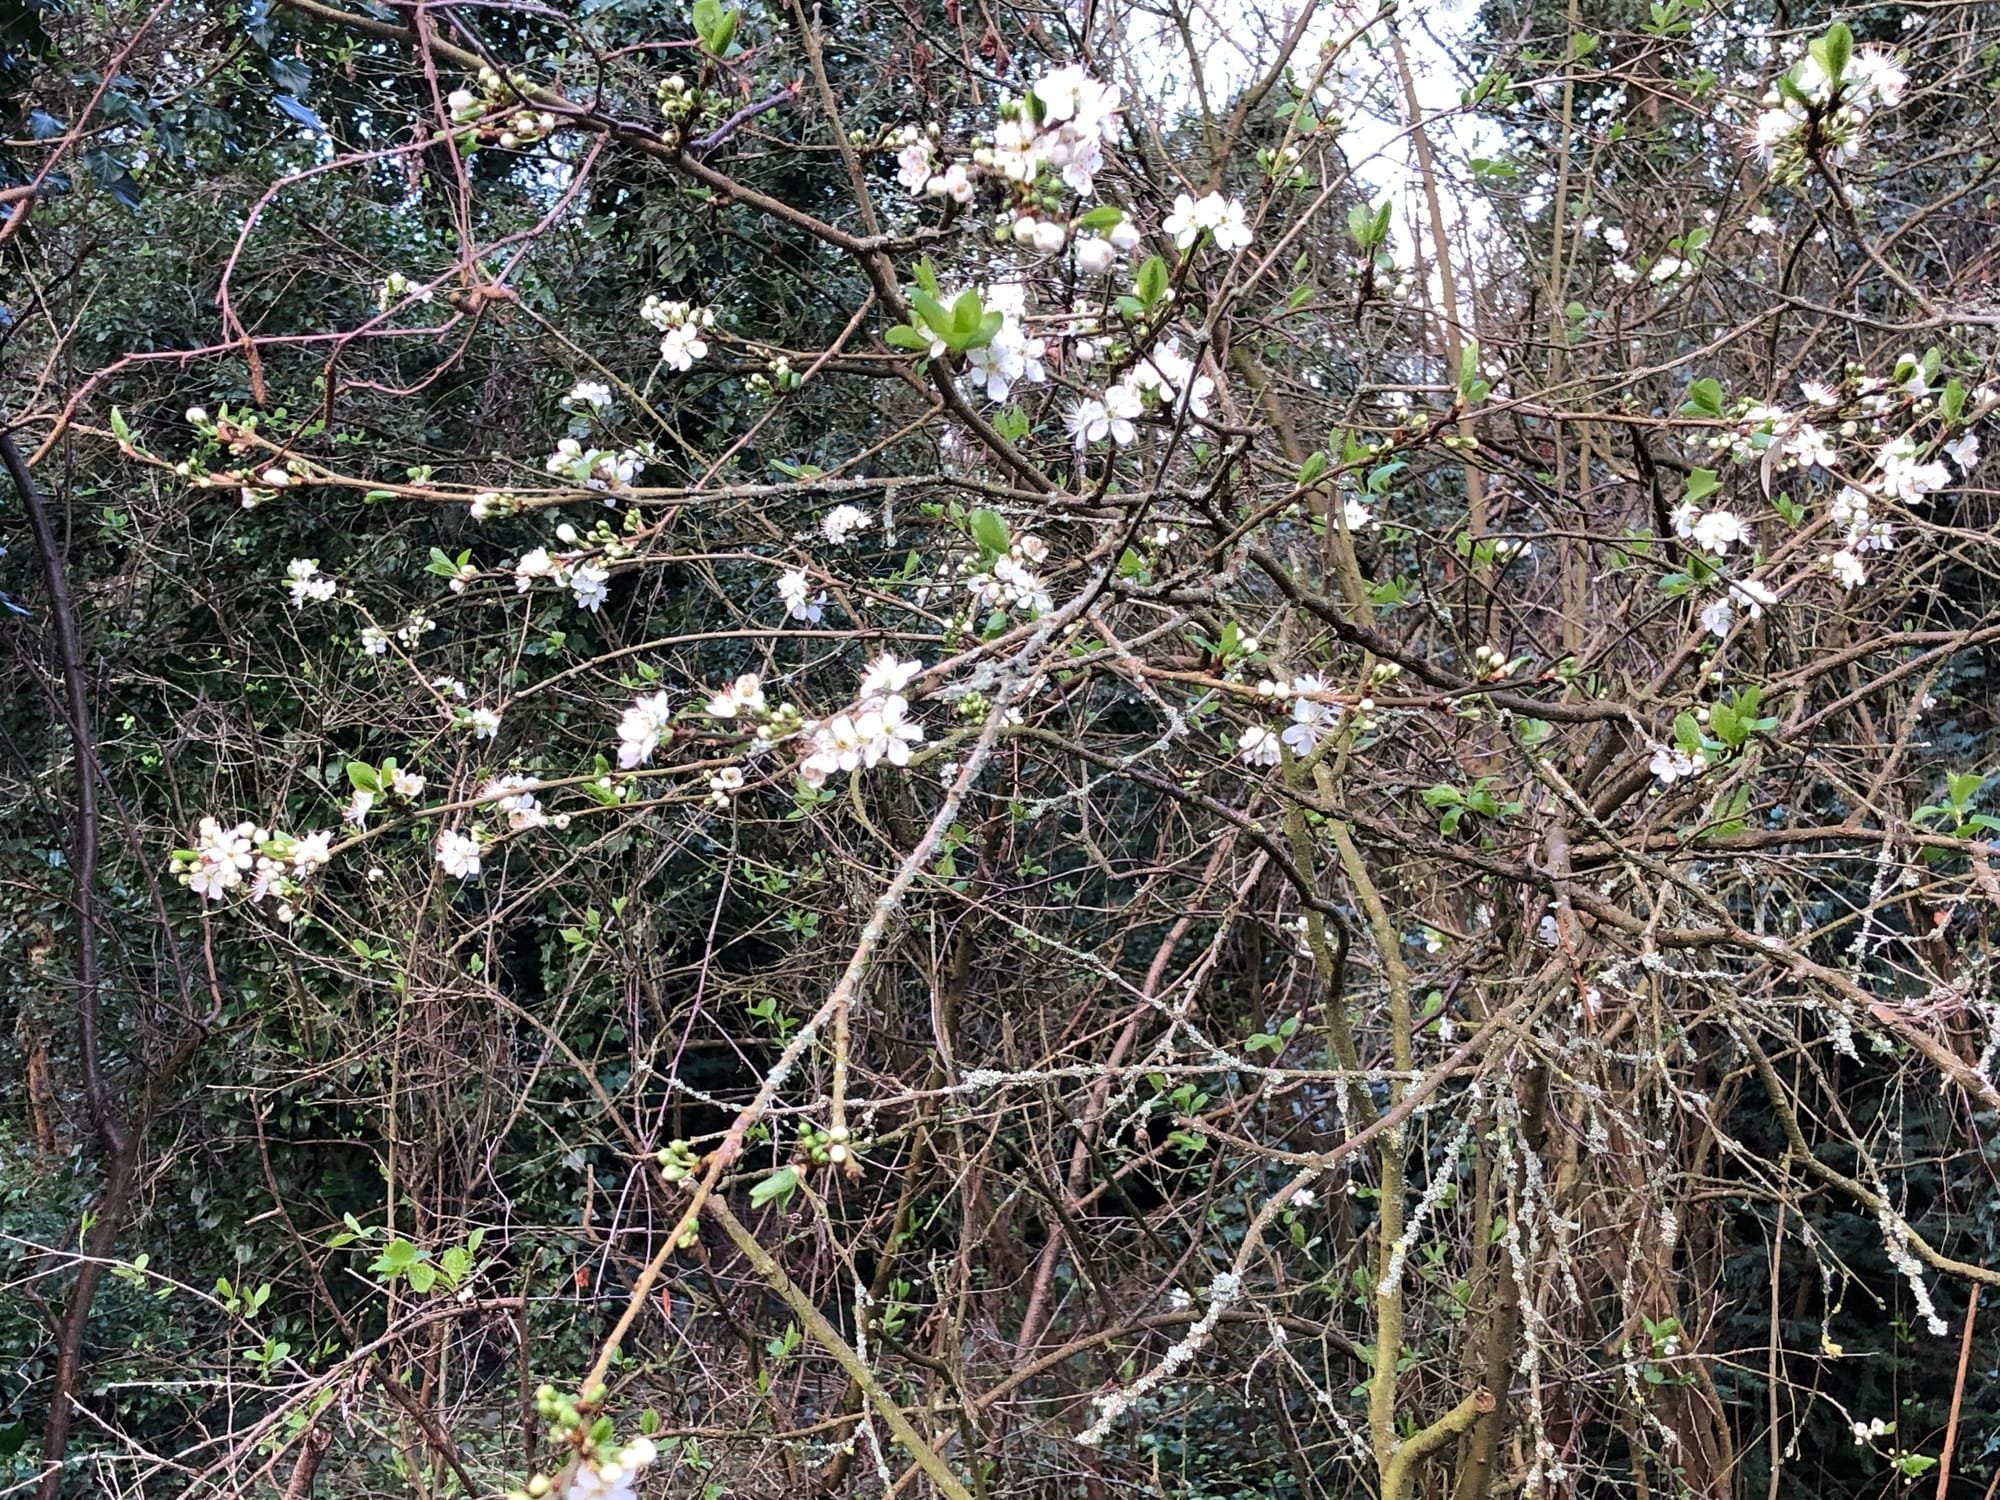 Blackthorn's early blossom in the recreation ground